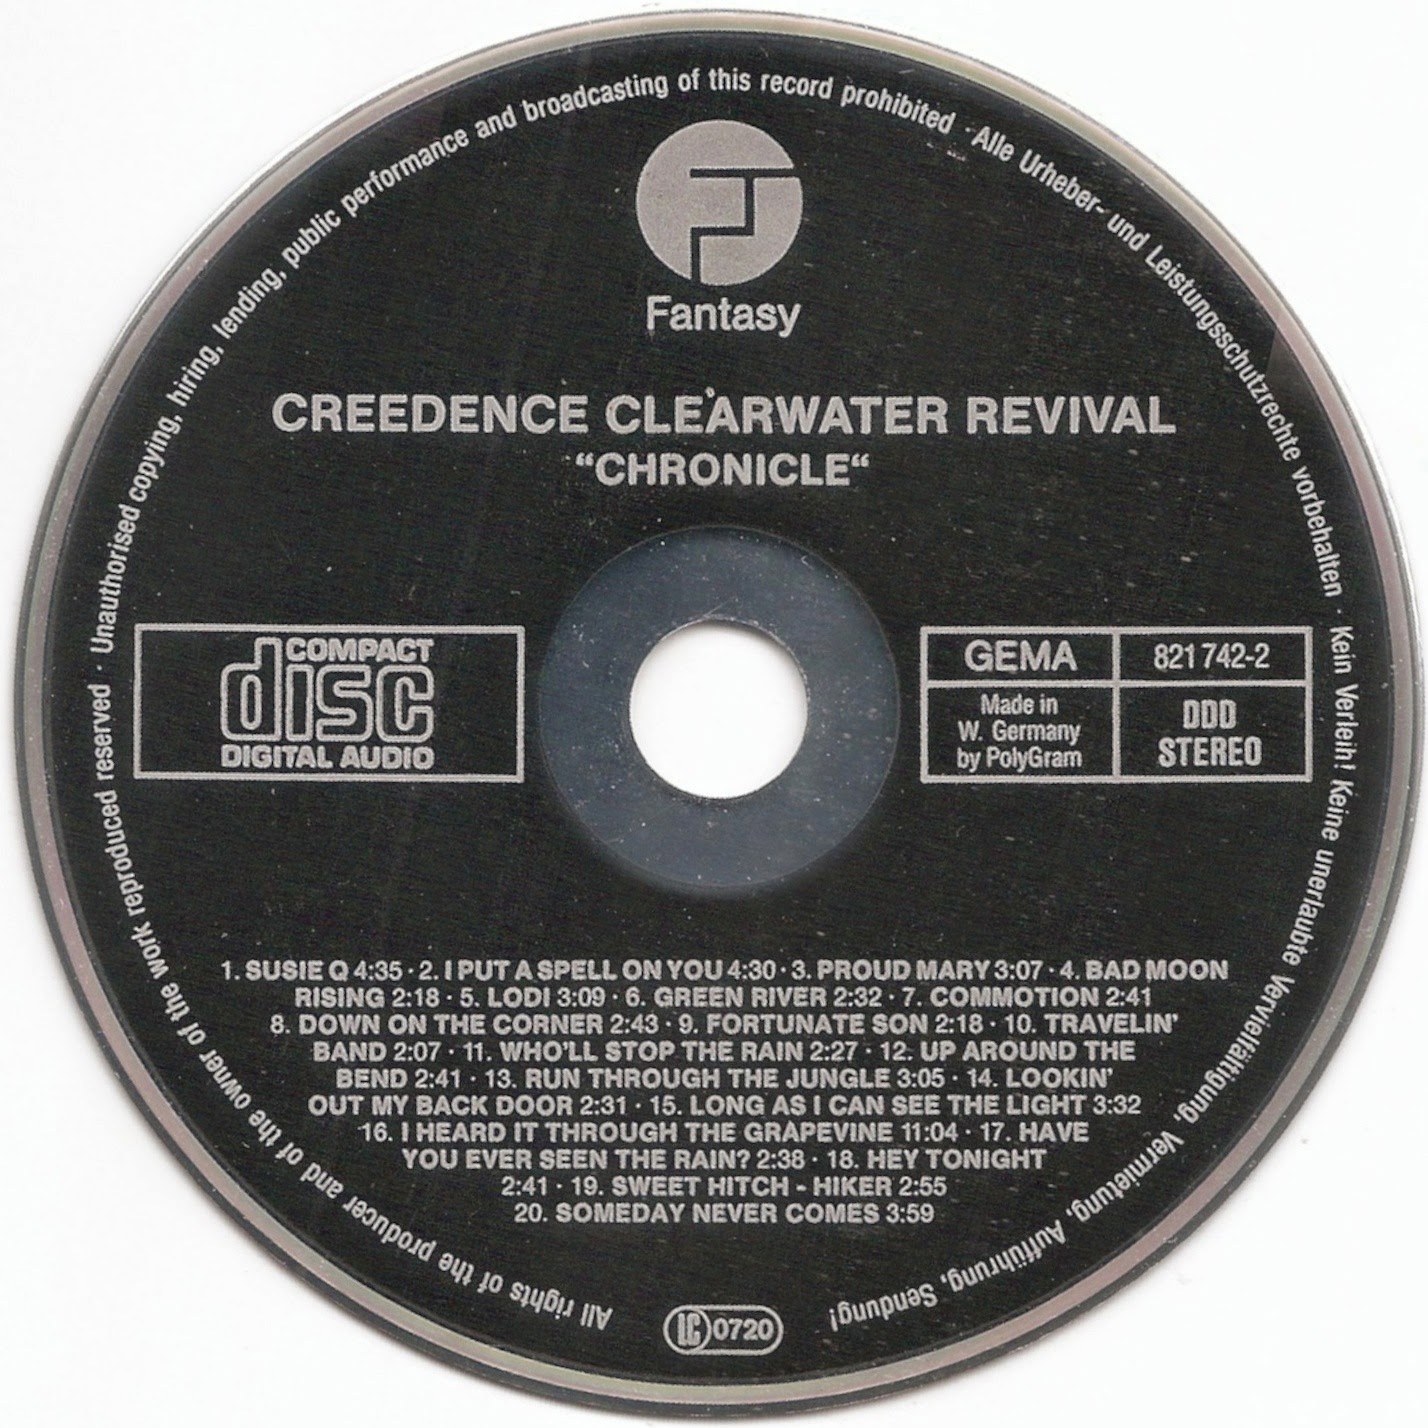 See the rain creedence. Creedence Clearwater Revived 25.02.2020. Creedence Clearwater Revival - absolute Hits (2016). Обложка диска Creedence Clearwater Revival - Revival. Sweet Hitch-Hiker Creedence Clearwater Revival.